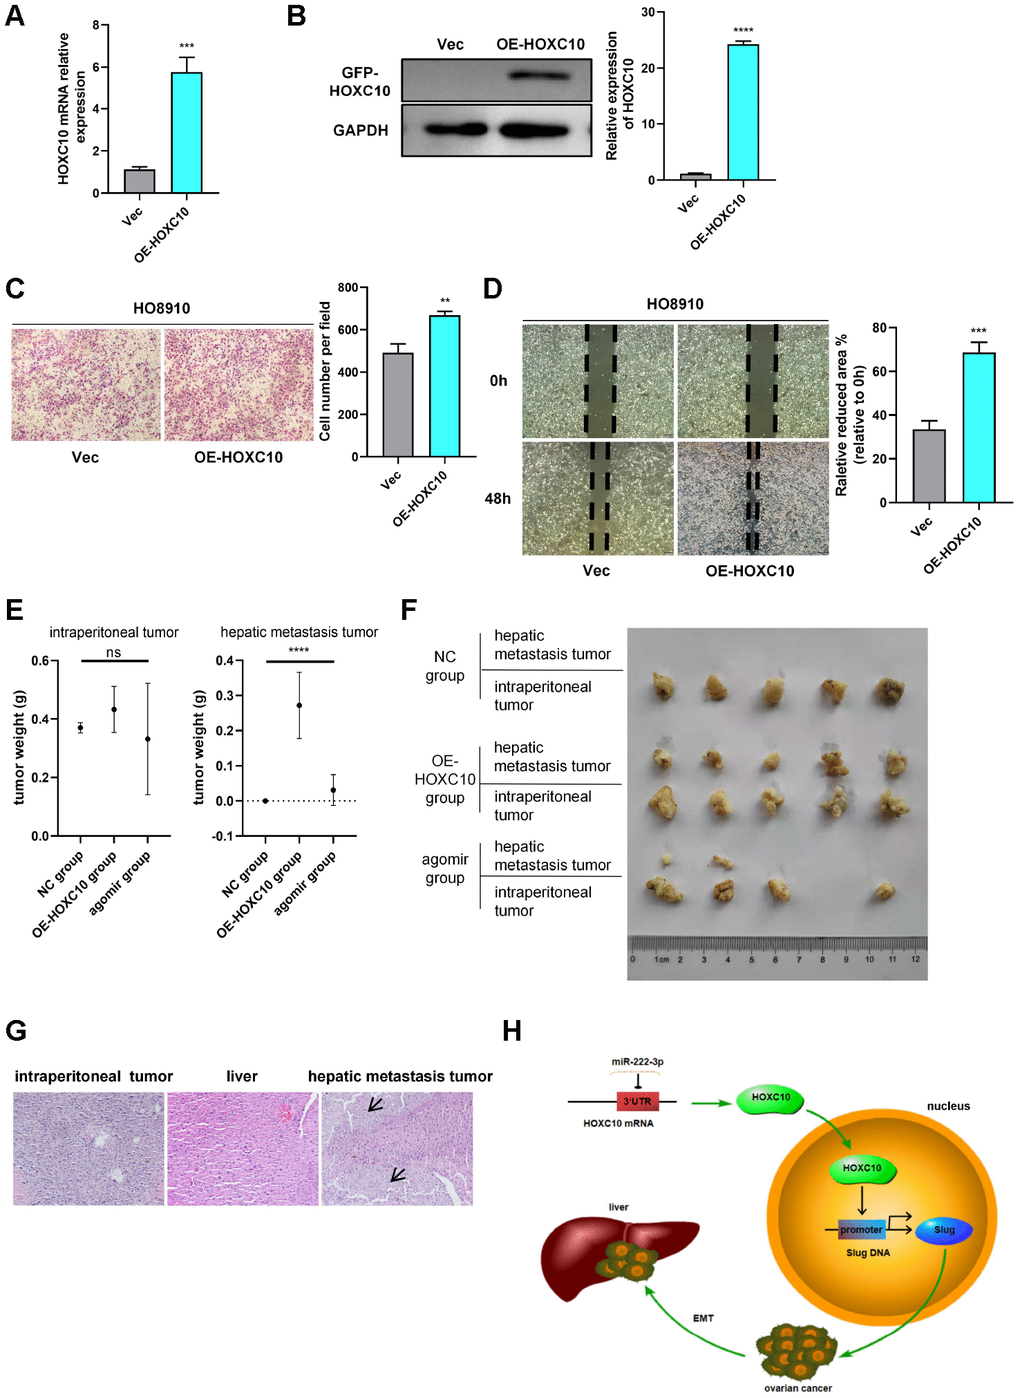 HOXC10 promotes OC metastasis in vivo. (A, B) Relative mRNA and protein expression levels of HOXC10 in VEC and OE-HOXC10 cells. P=0.0003 and PC, D) Transwell and wound healing assays of VEC and OE-HOXC10 cells. P=0.0027 and P=0.0005. Scale bars, 100 μm and 200 μm, respectively. (E) Weights of intraperitoneal tumours and hepatic metastasis tumours from mice in the NC, OE-HOXC10 and agomir groups. (F) Photograph of tumours excised from mice. (G) HE staining of intraperitoneal tumours and livers from mice in the NC, OE-HOXC10 and agomir groups. The black arrows show the regions of tumour metastasis in the livers. Scale bars, 50 μm. (H) A schematic showing that HOXC10 upregulates EMT by directly targeting the downstream Slug gene and that miR-222-3p downregulates HOXC10 by directly binding to its 3’-UTR.